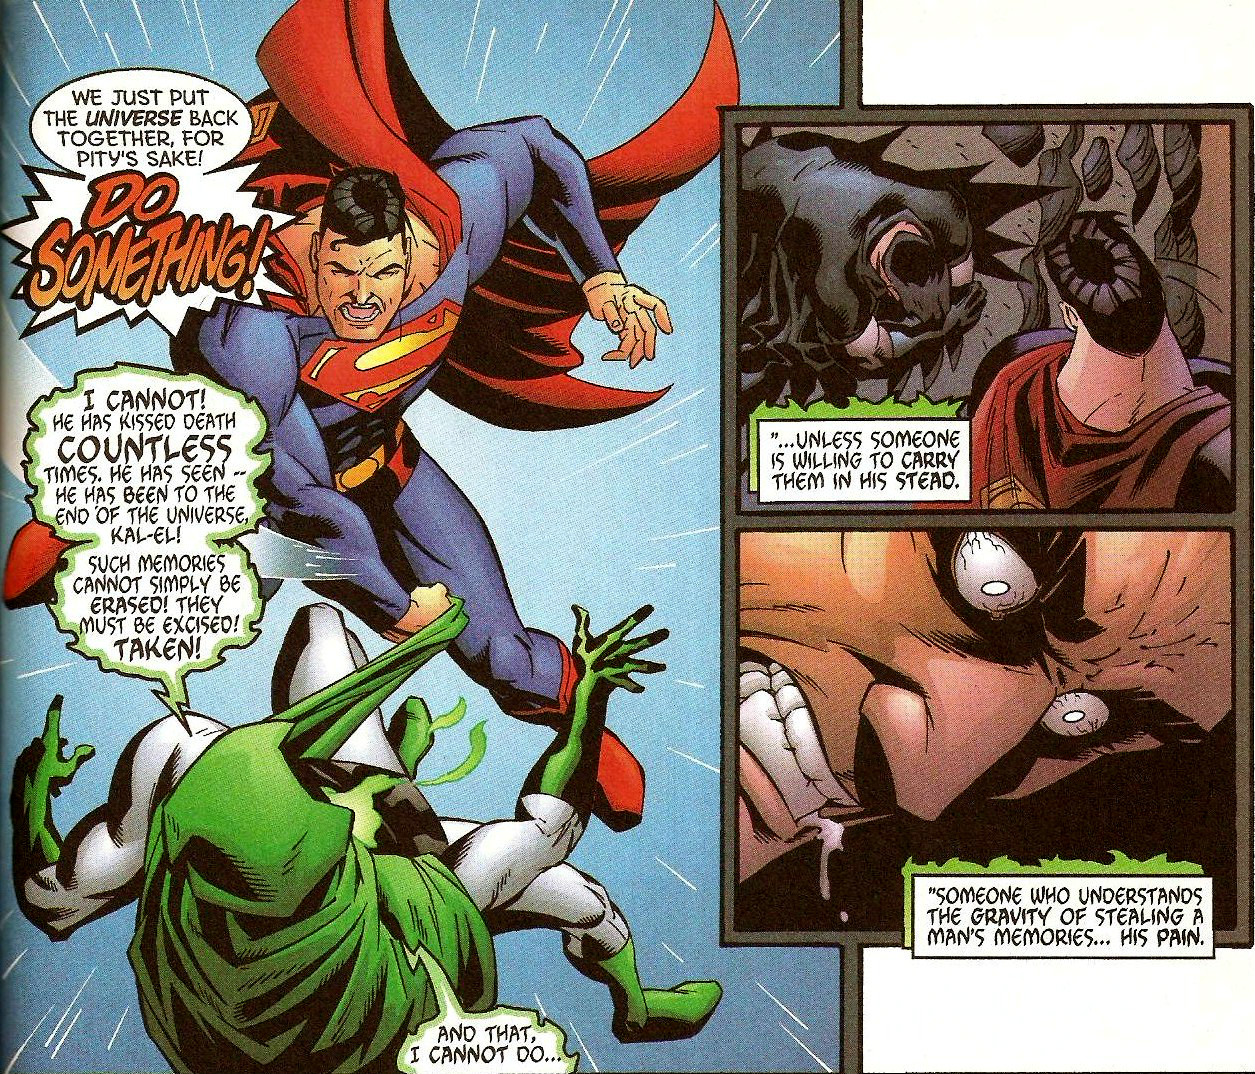 From Action Comics (Vol. 1) #770 (2000)